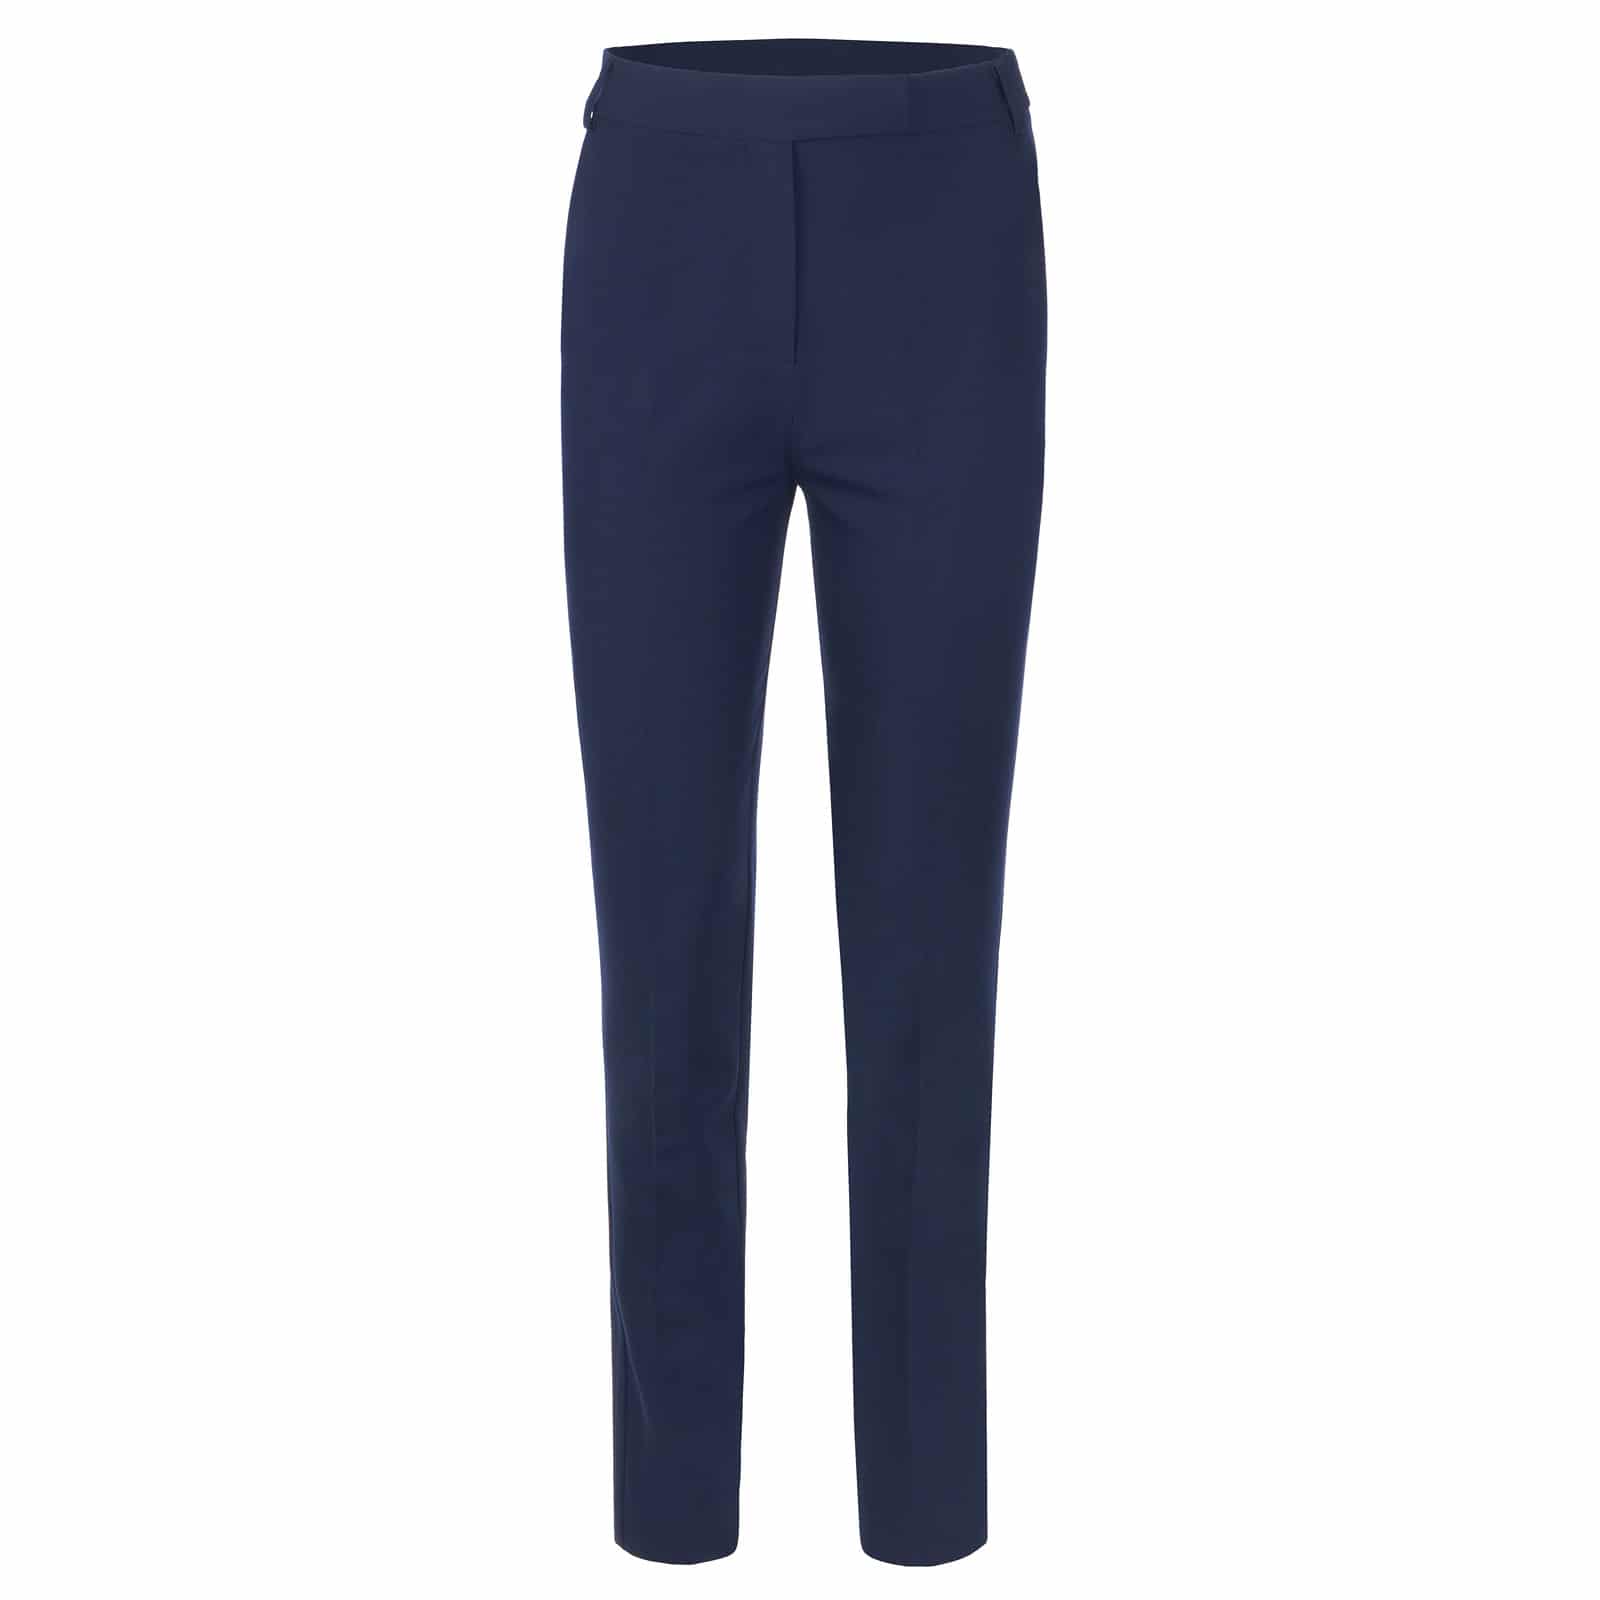 Prince Oliver Women's Trousers Blue - Prince Oliver